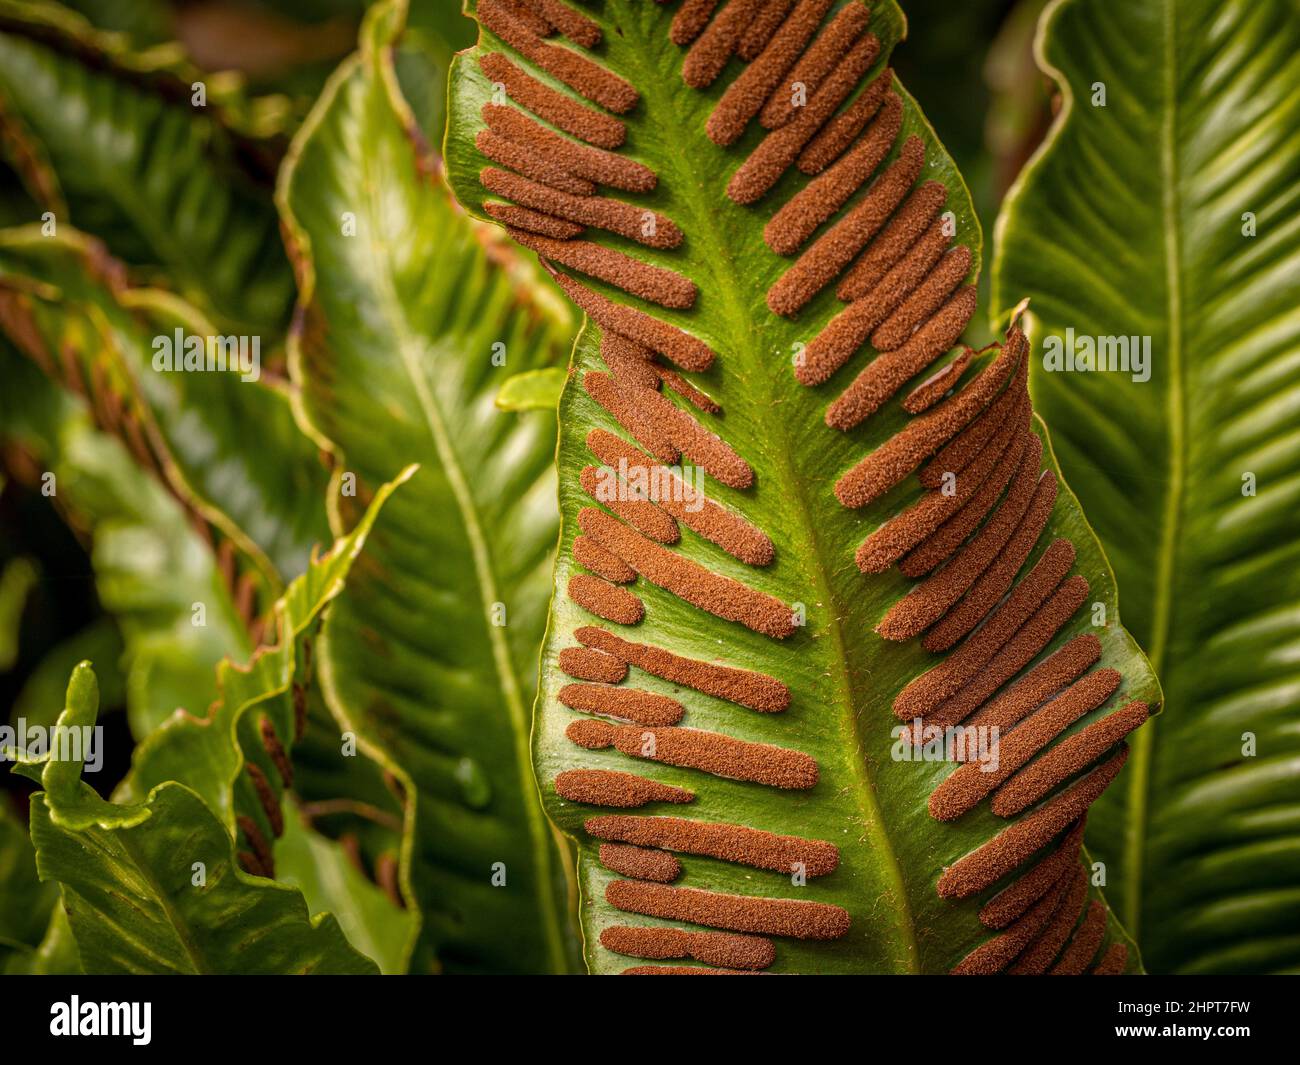 Closeup of spores on under side of Asplenium scolopendrium fronds. The plant is commonly called hart's tongue fern. Stock Photo